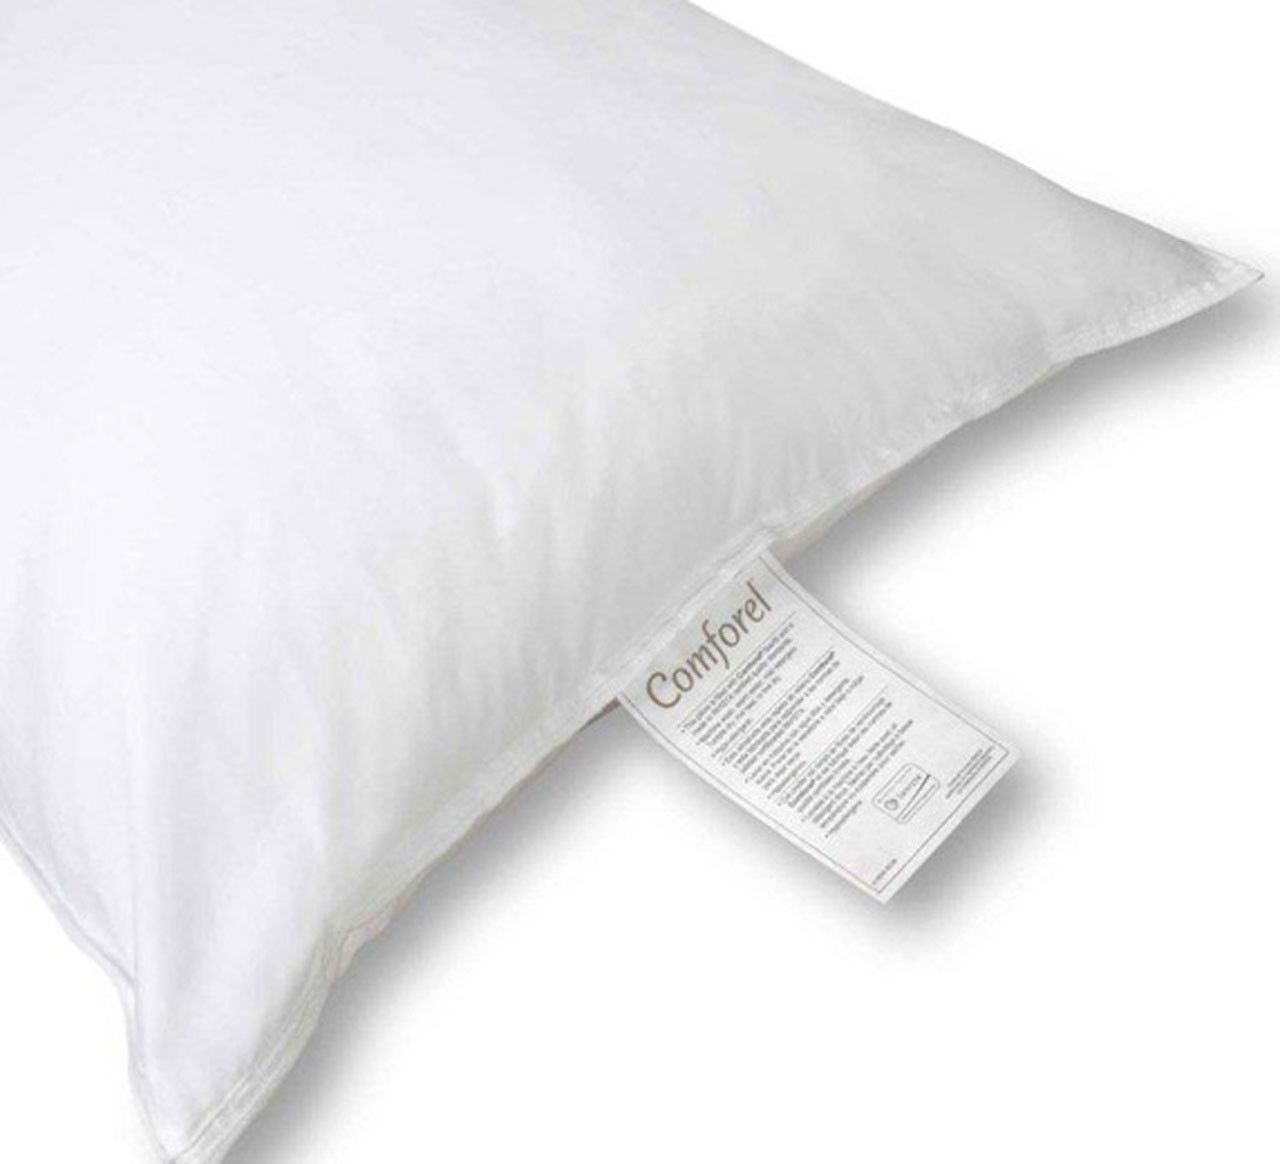 What does the innovative technology in Comforel pillows ensure?